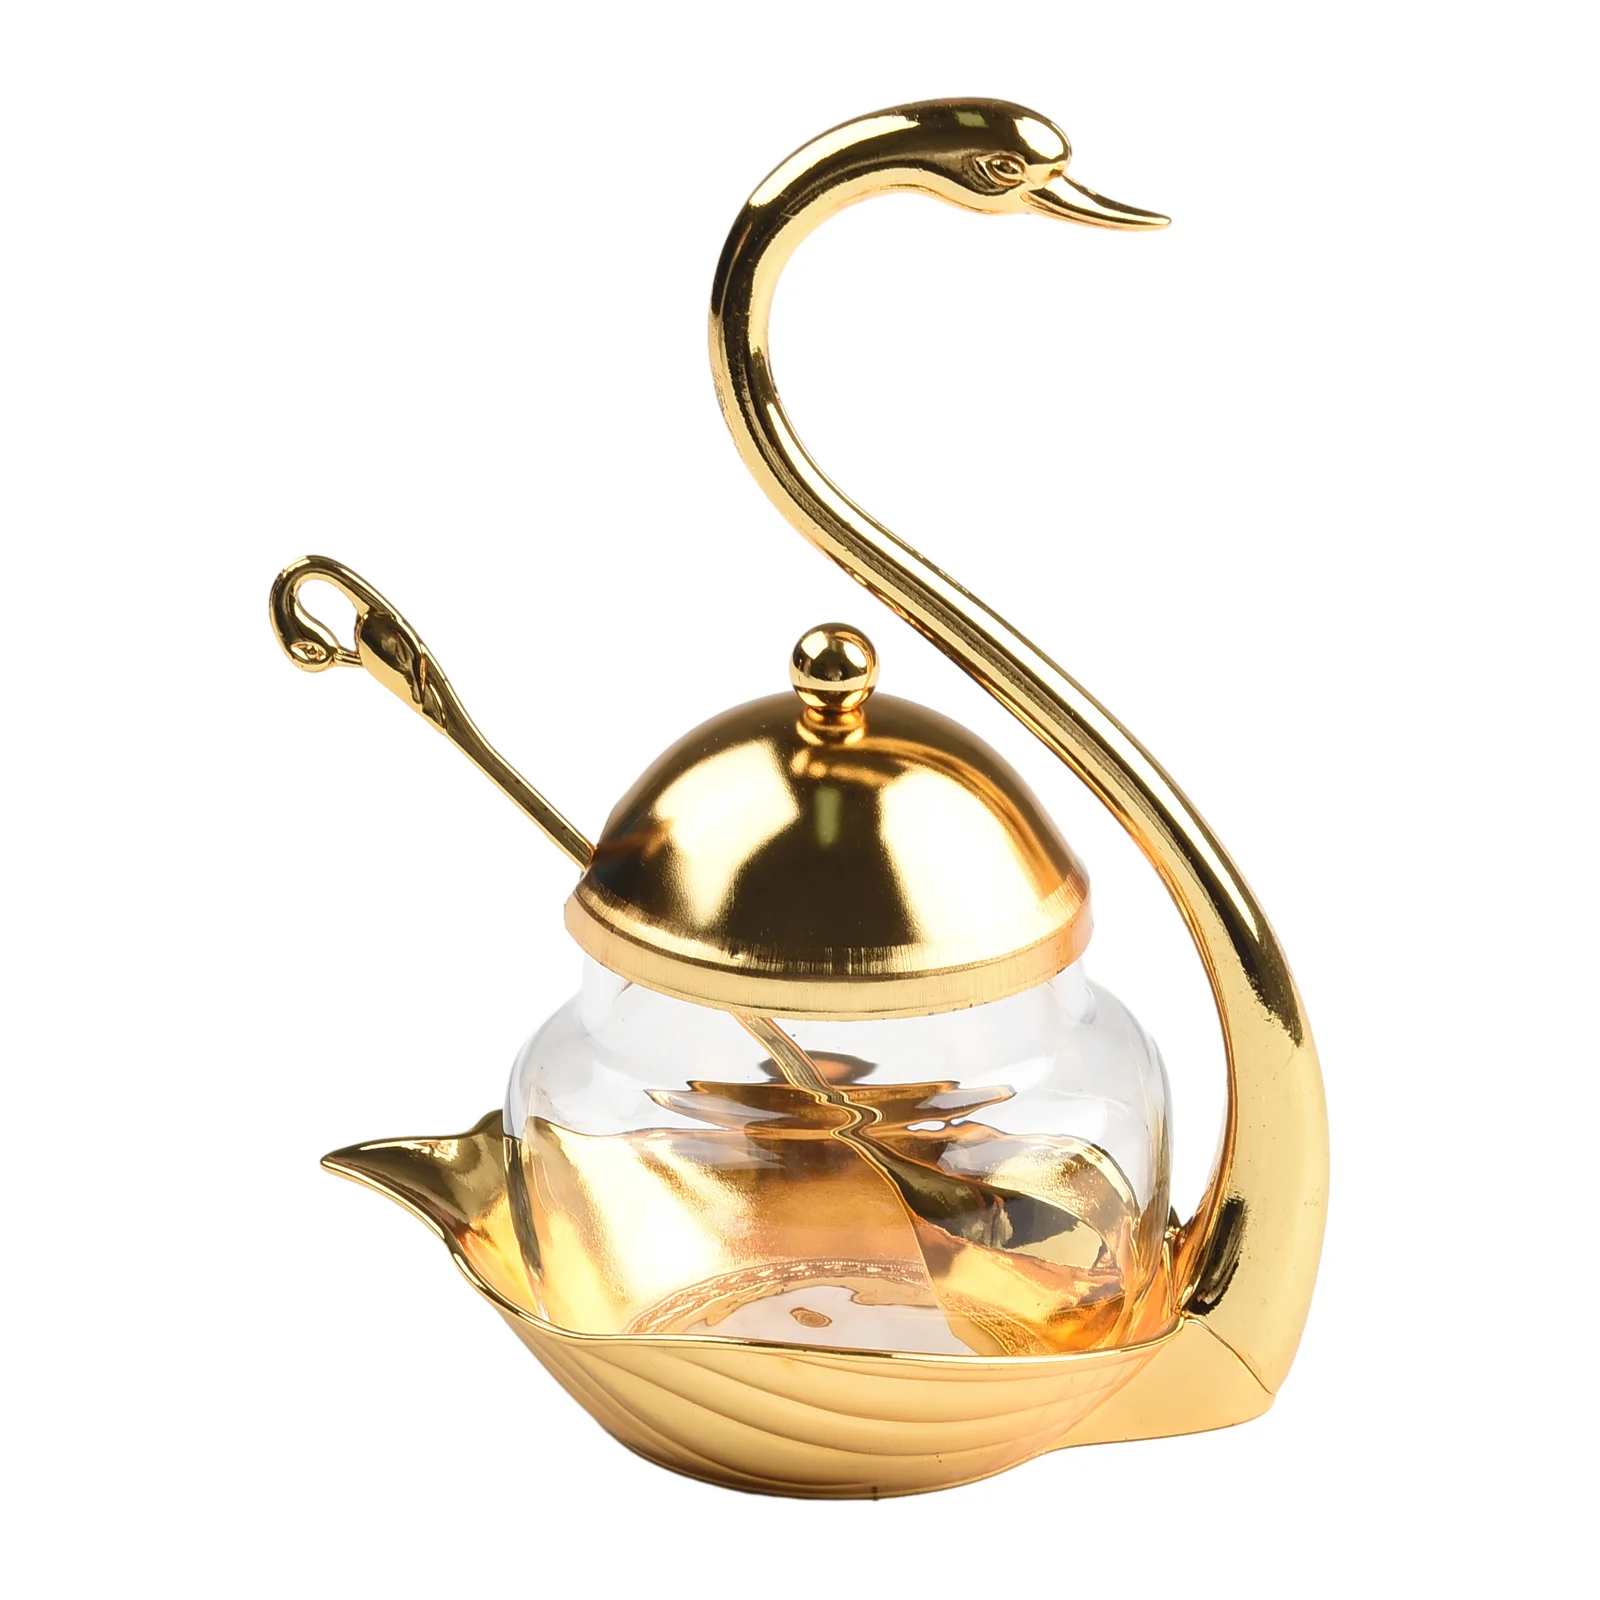 

Seasoning Container Condiment Pot Swan Rack With Serving Spoon Kitchen Supplies Seasoning Spice Box Spice Glass Jar